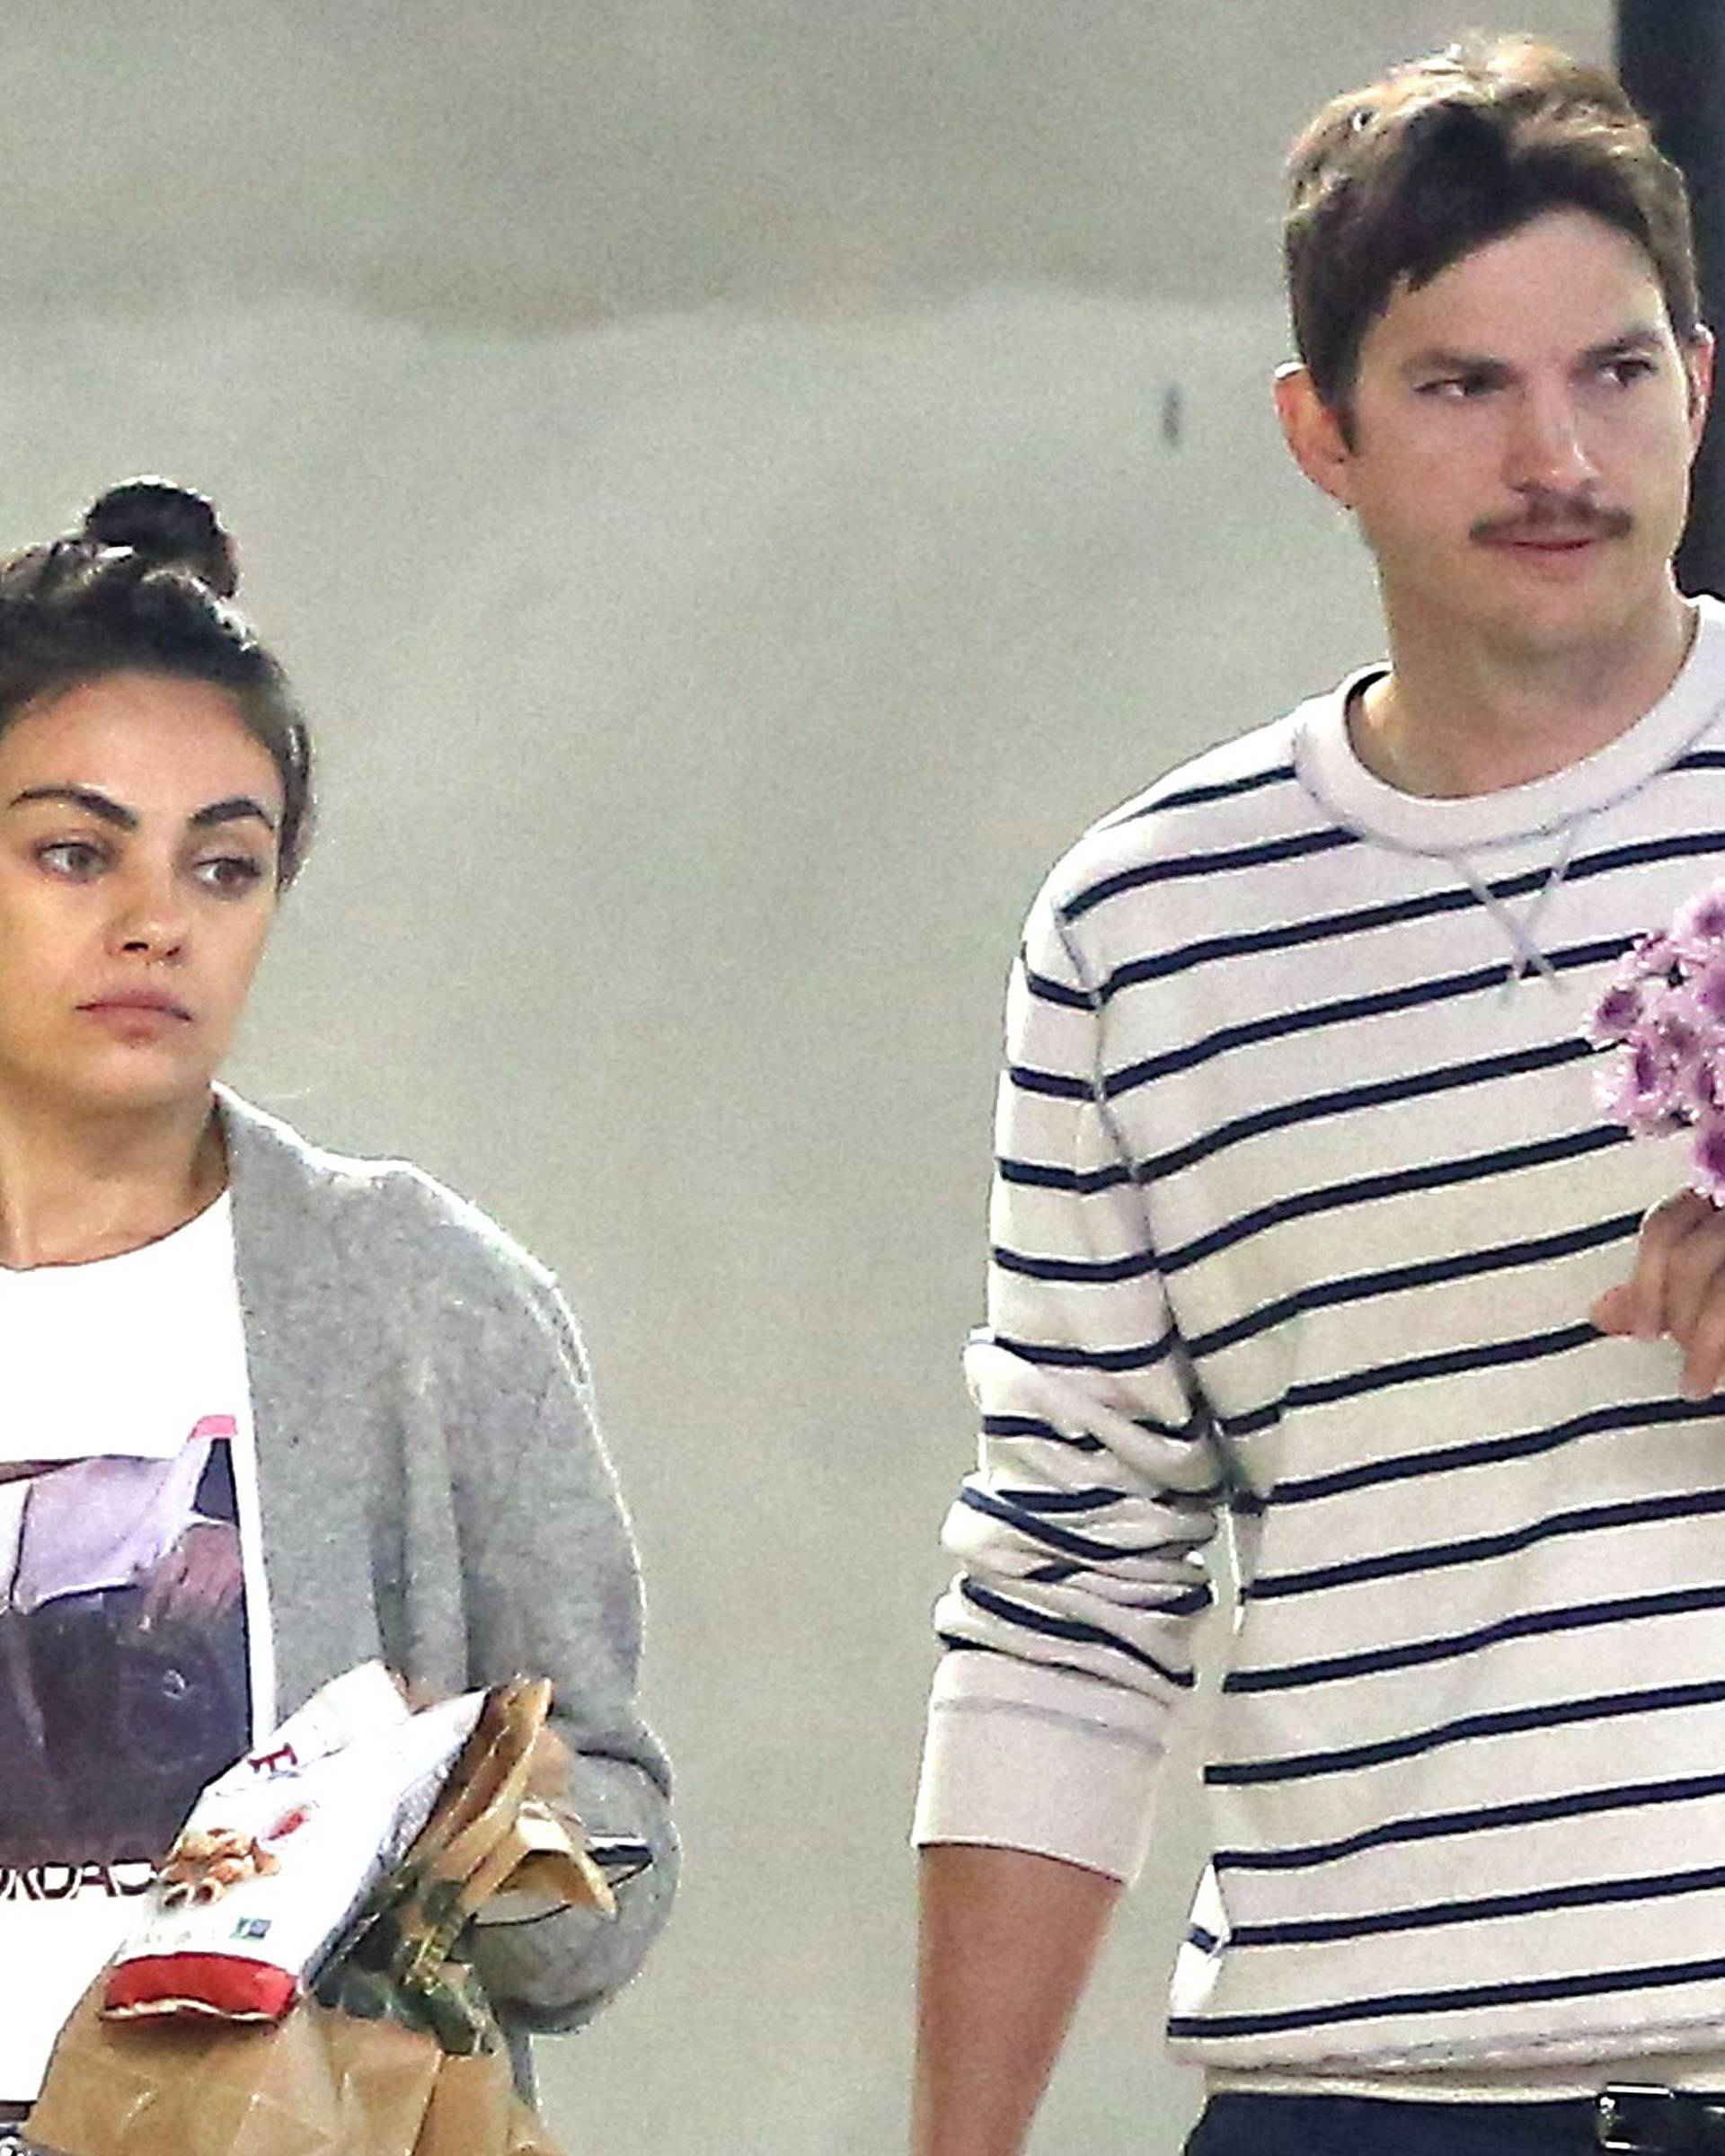 EXCLUSIVE: Mila Kunis and Ashton Kutcher out in Los Angeles buying some flowers